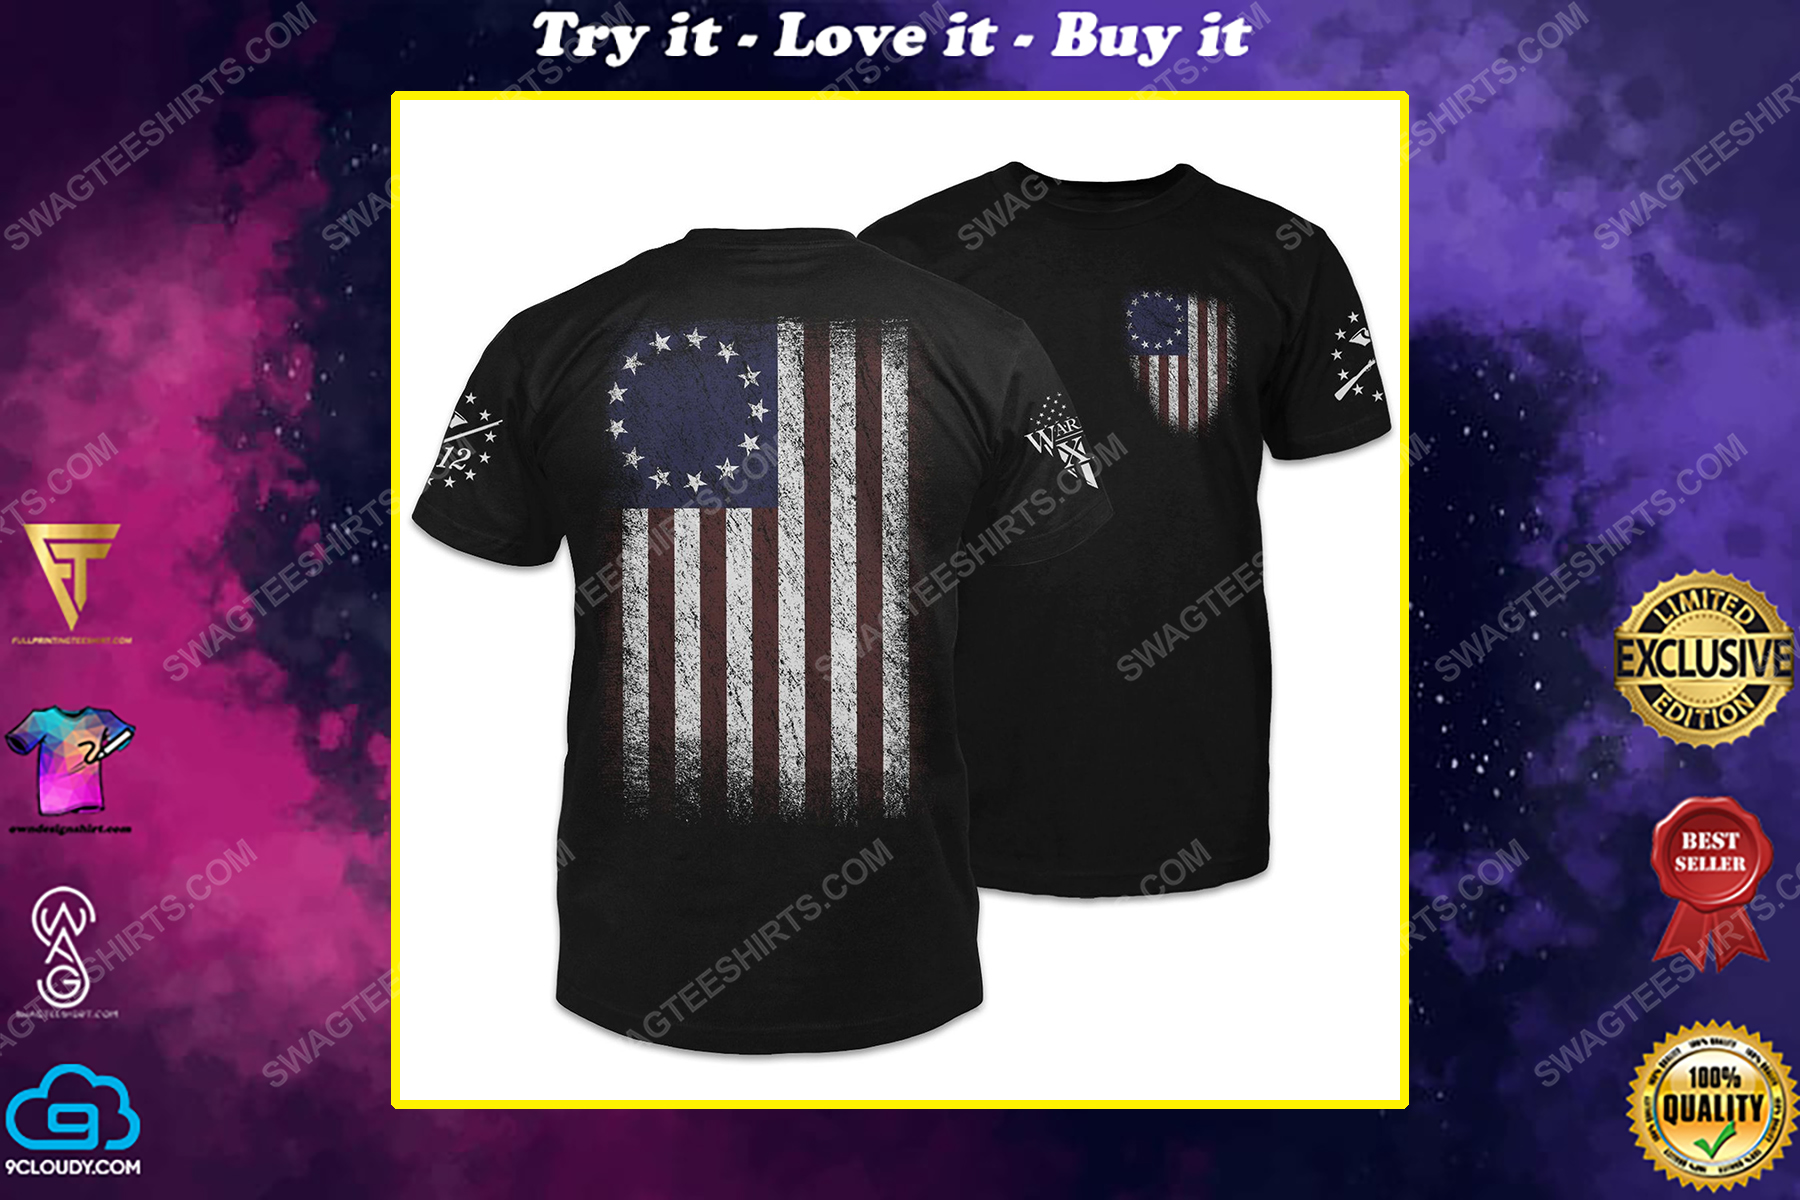 Stand for the usa betsy ross flag shirt